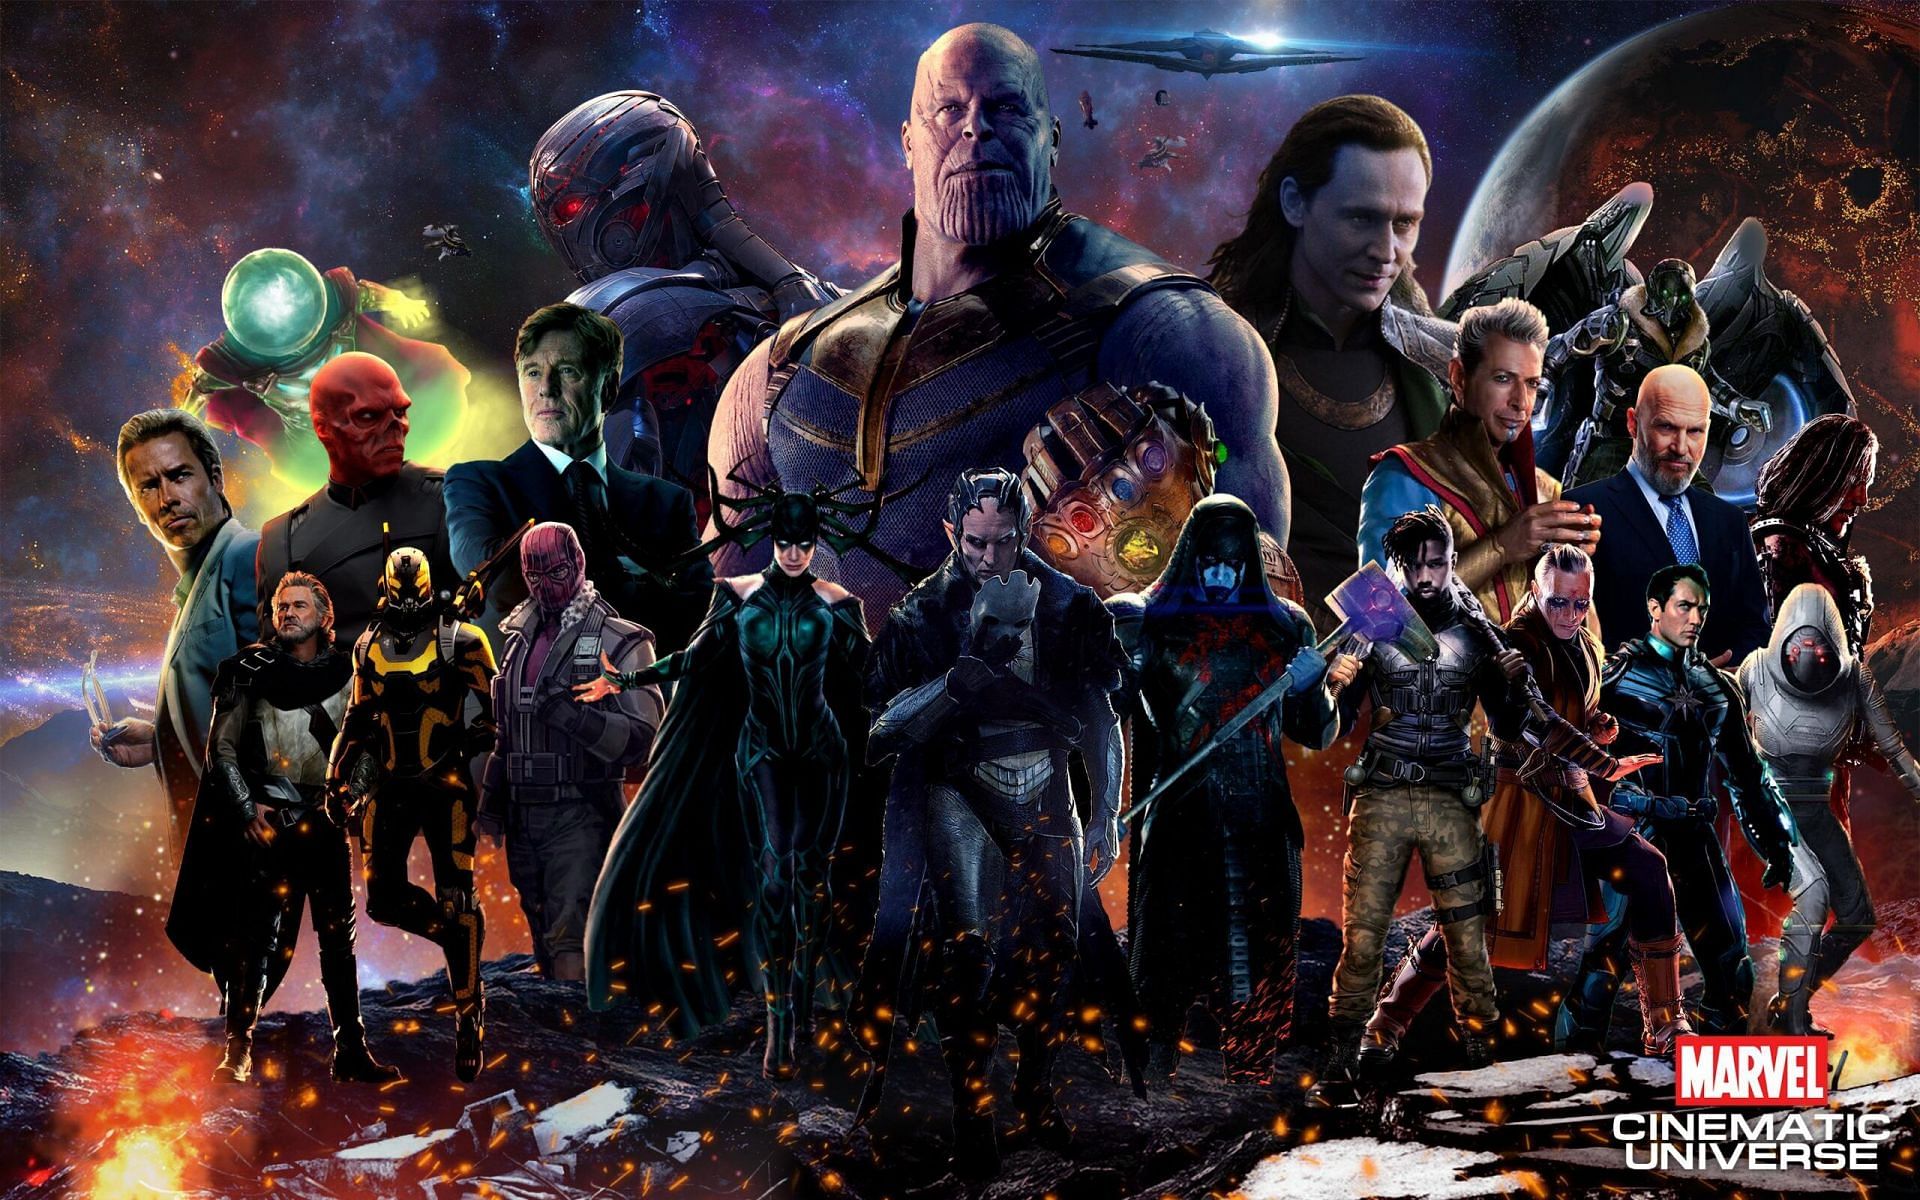 The Marvel Cinematic Universe has given us some of the most iconic villains in cinematic history. (Image via Marvel)